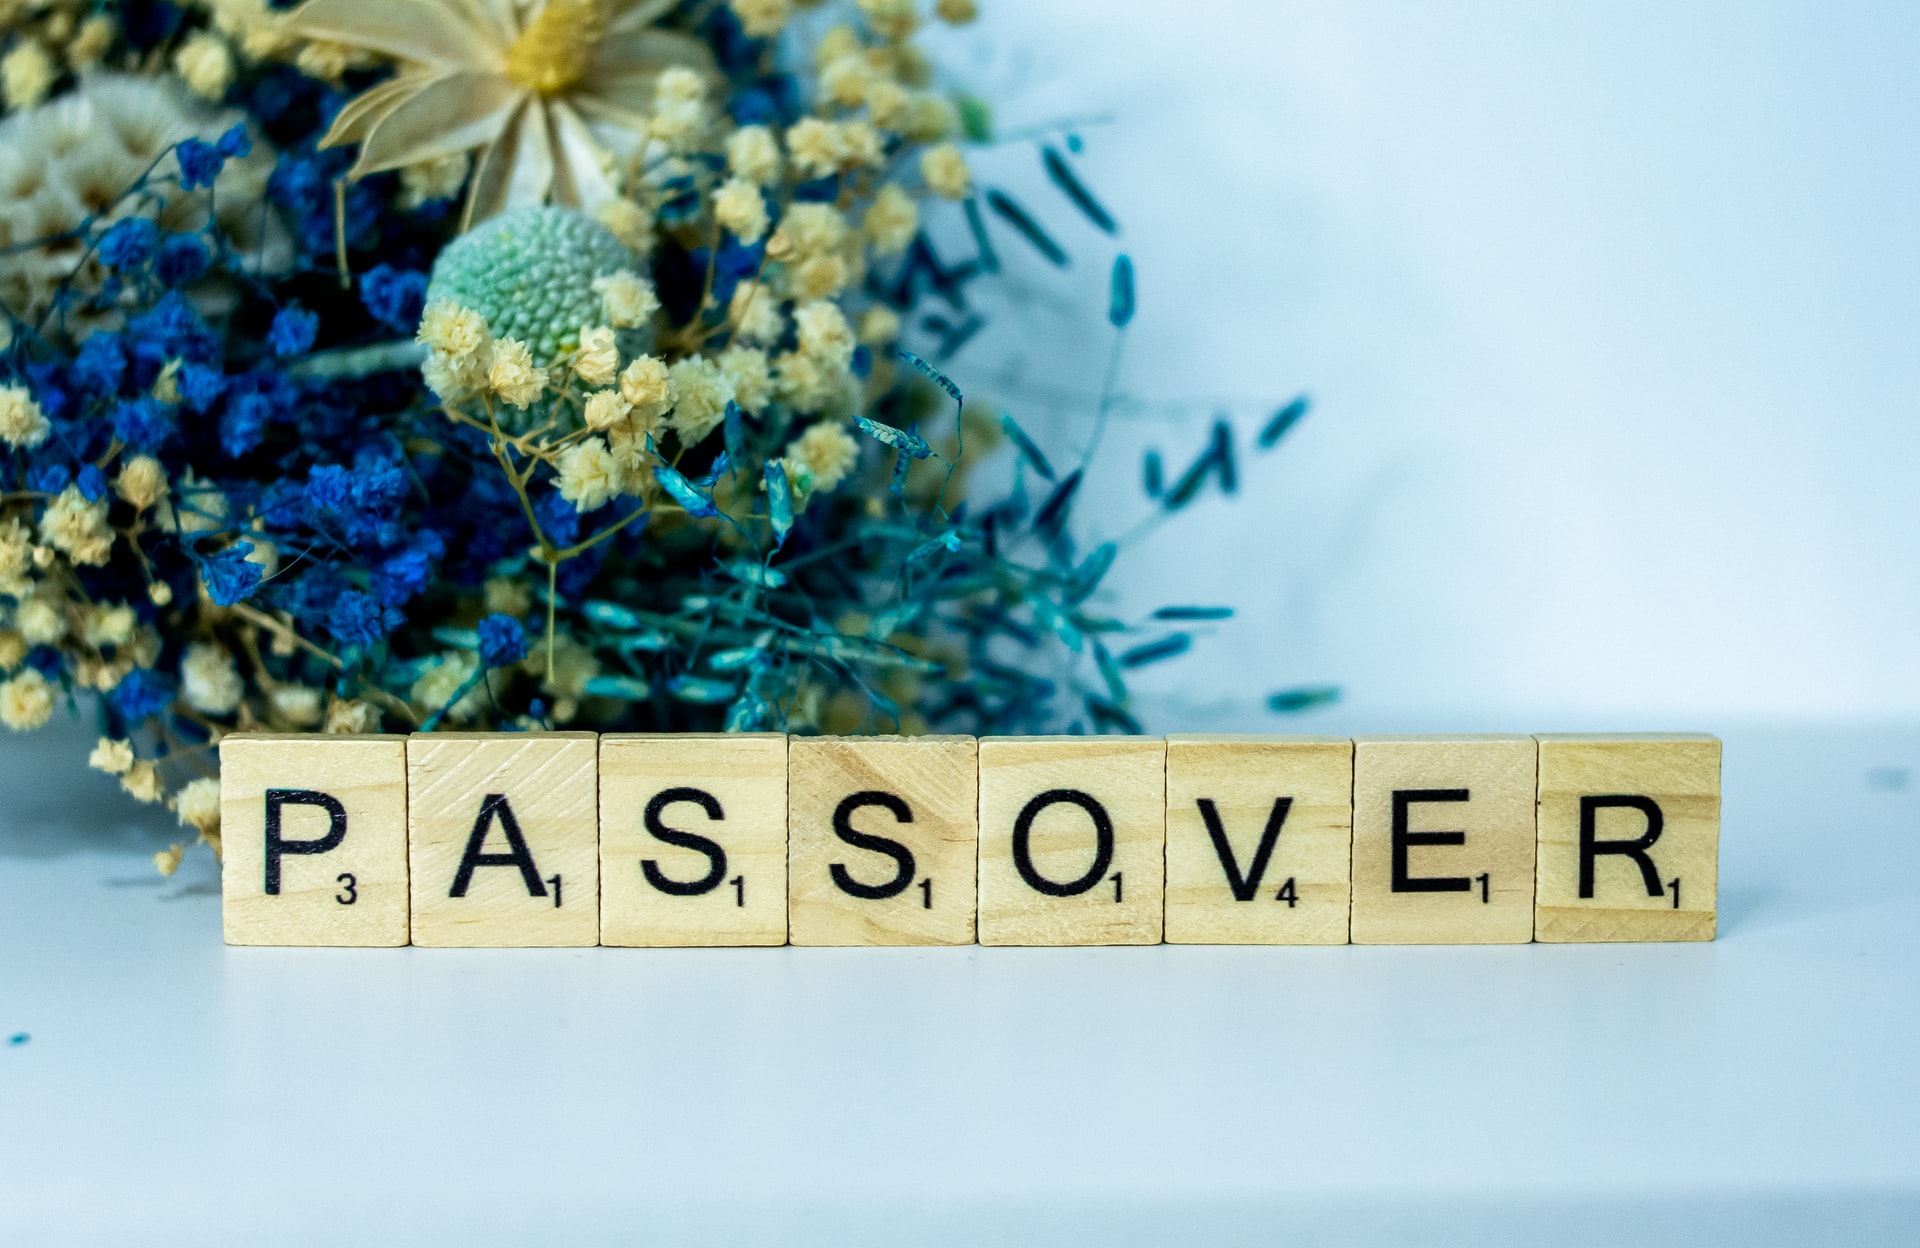 Things You Probably Didn't Know about Passover